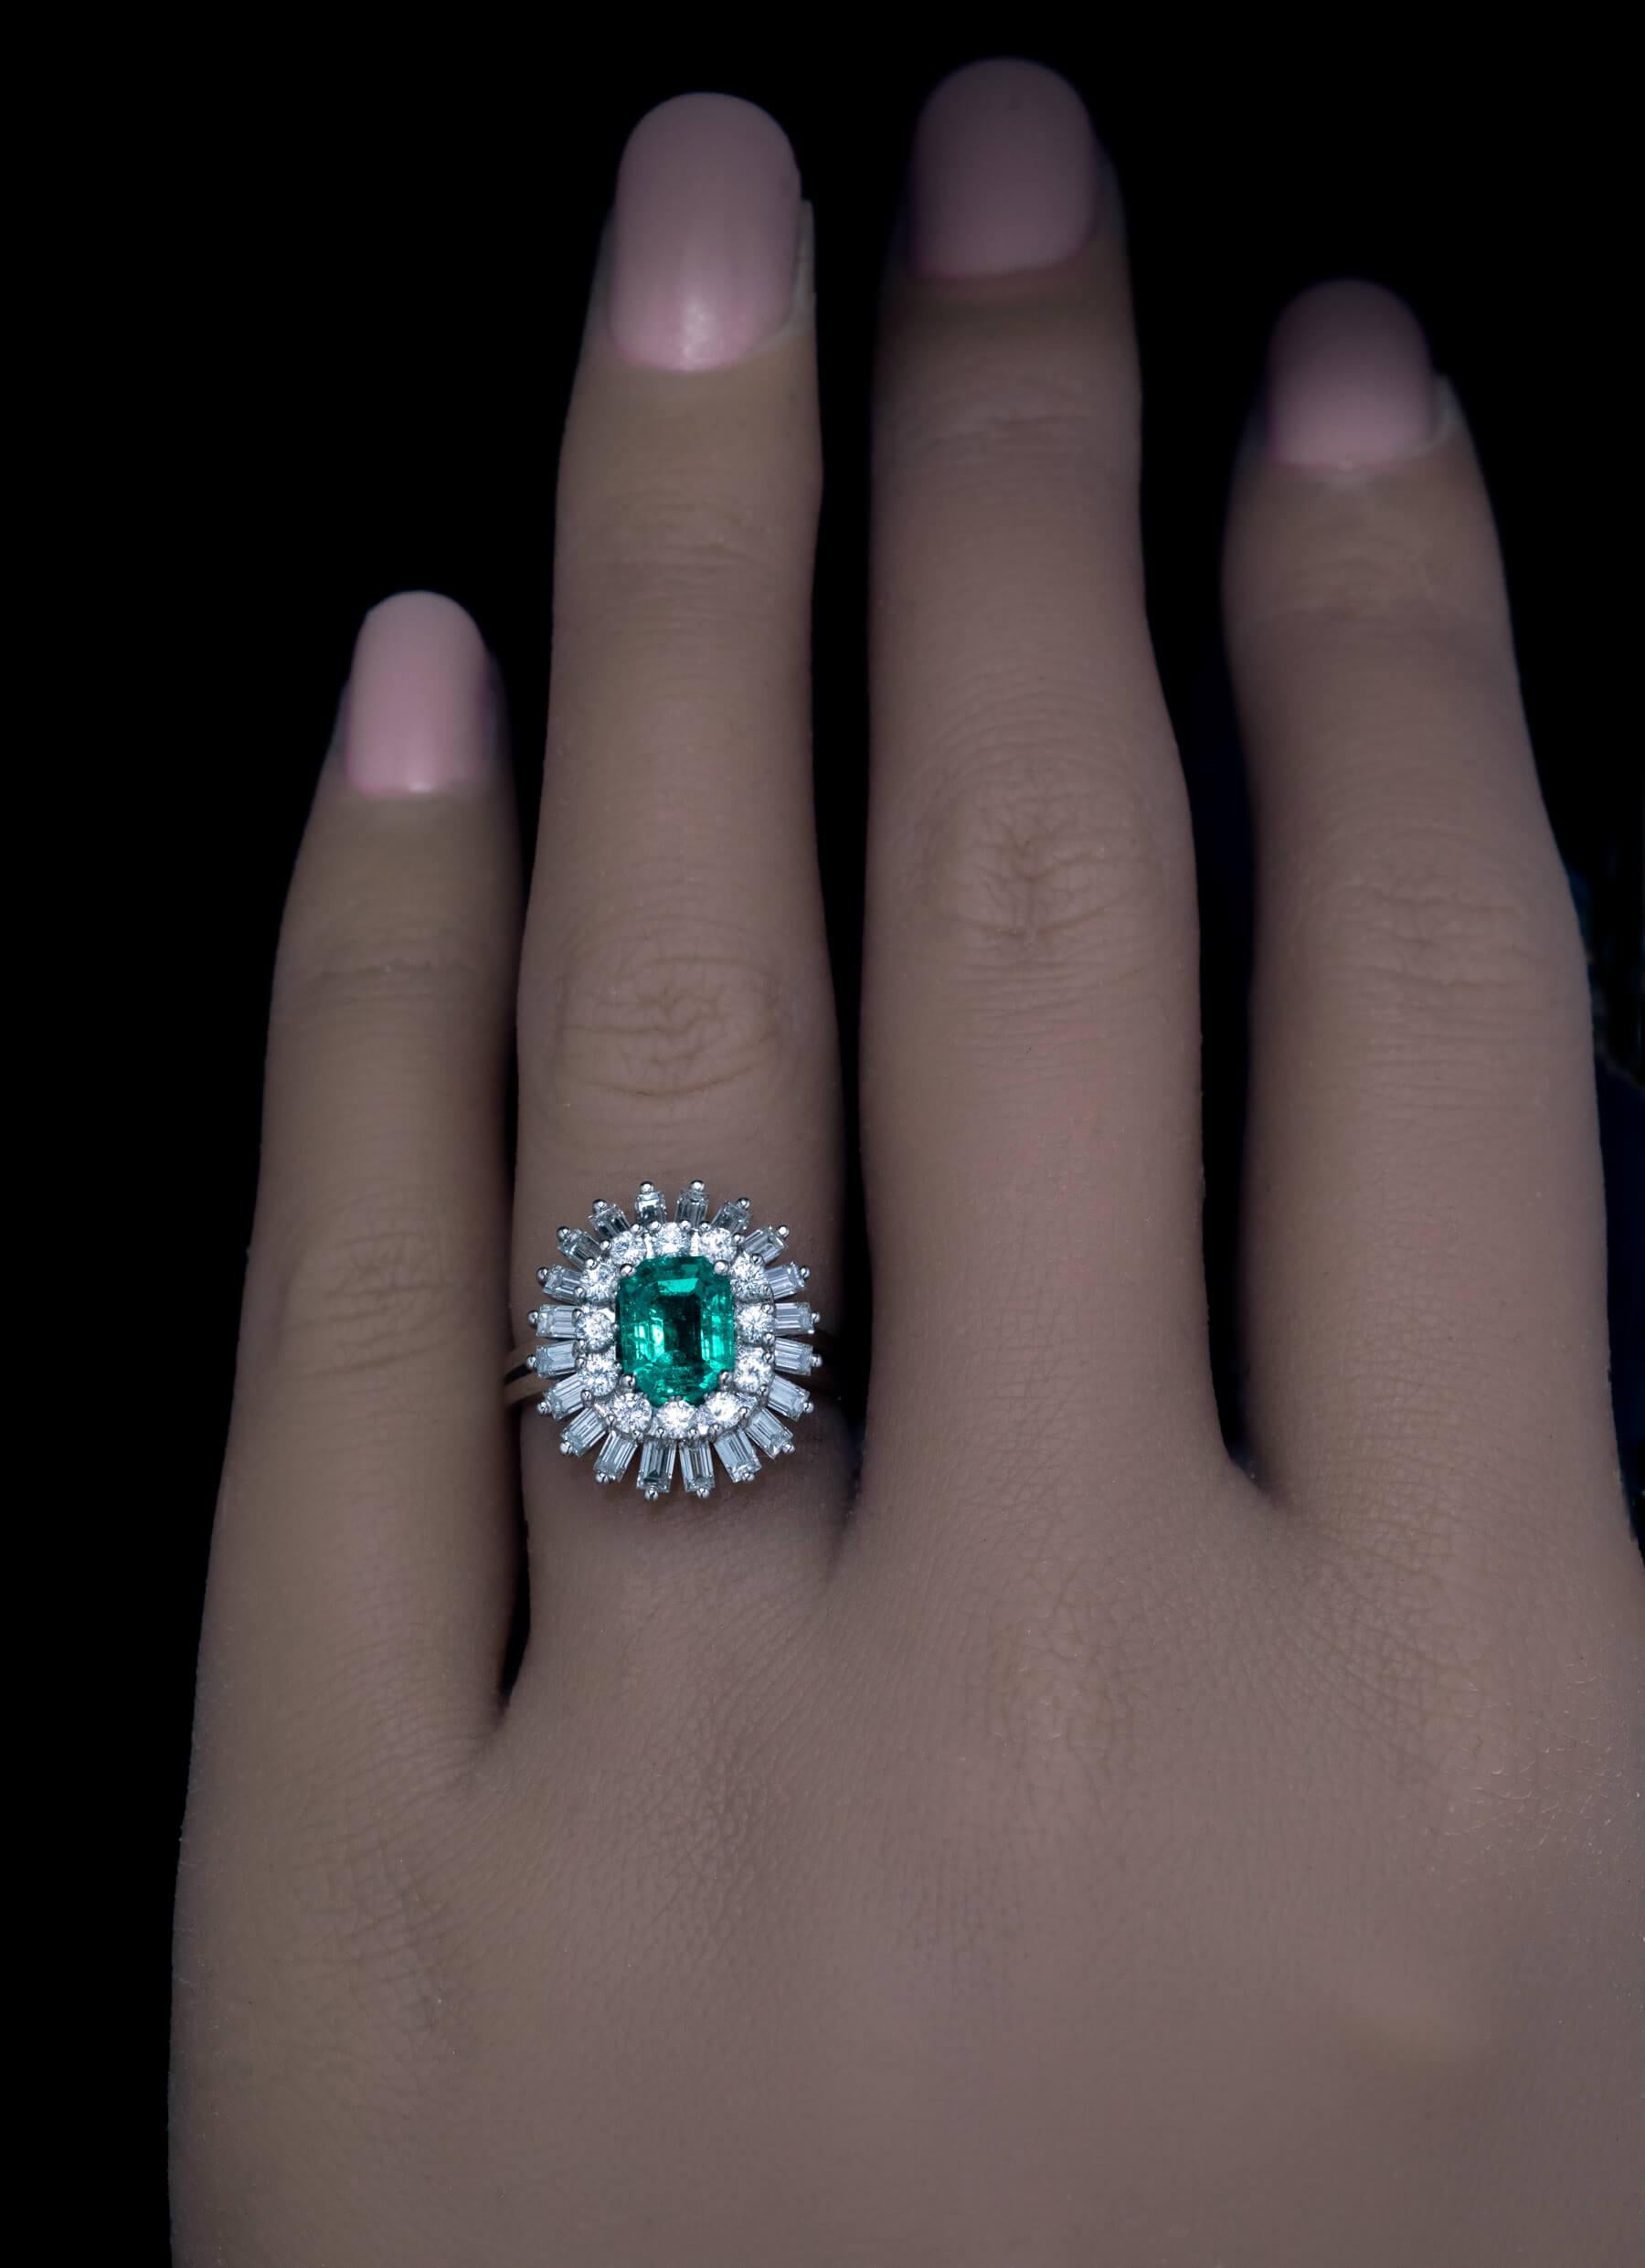 This 18K white gold engagement ring features a 1.35 carat emerald cut emerald of excellent bluish green color framed by bright white round brilliant cut (F-G color, SI clarity) and baguette cut diamonds (E-F color, VS clarity).  Total emerald weight